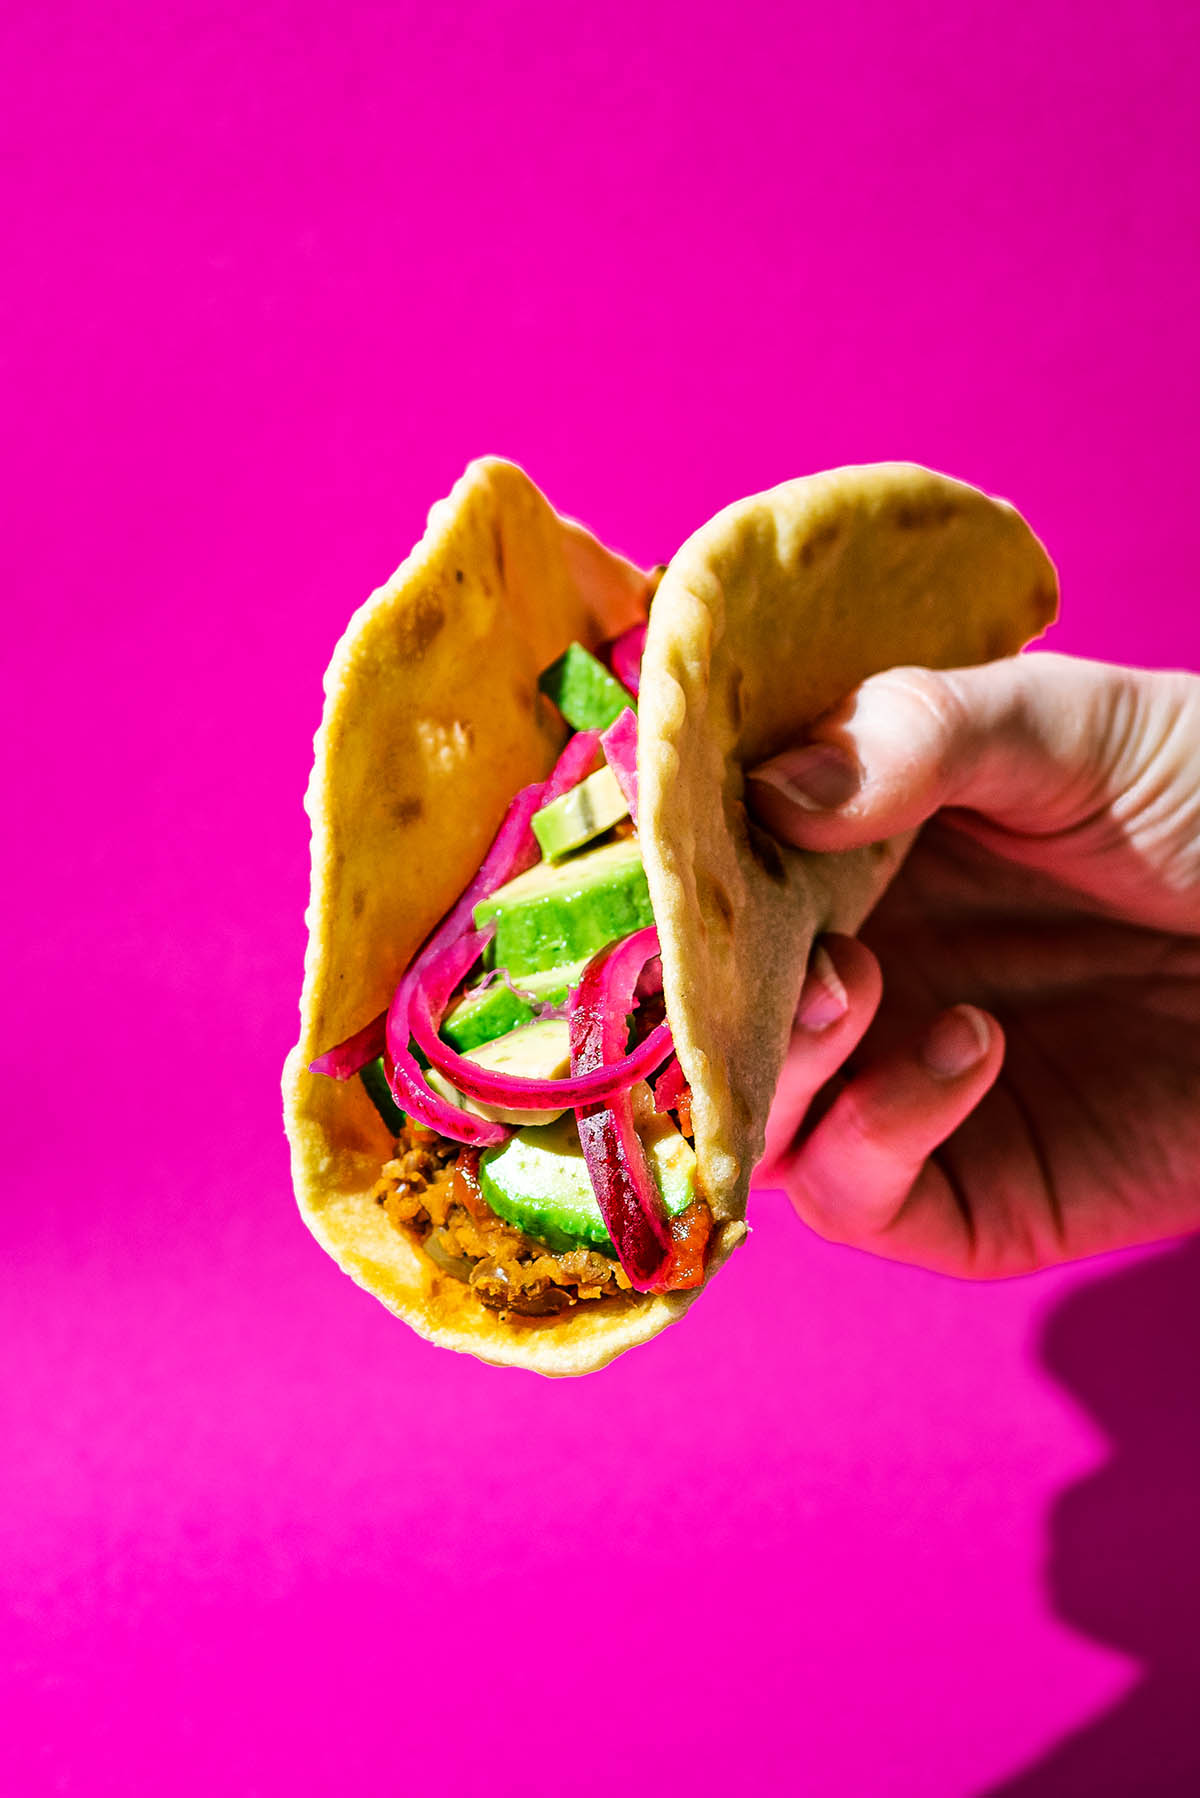 Filled tortilla with refried beans, pickled onion, and avocado.